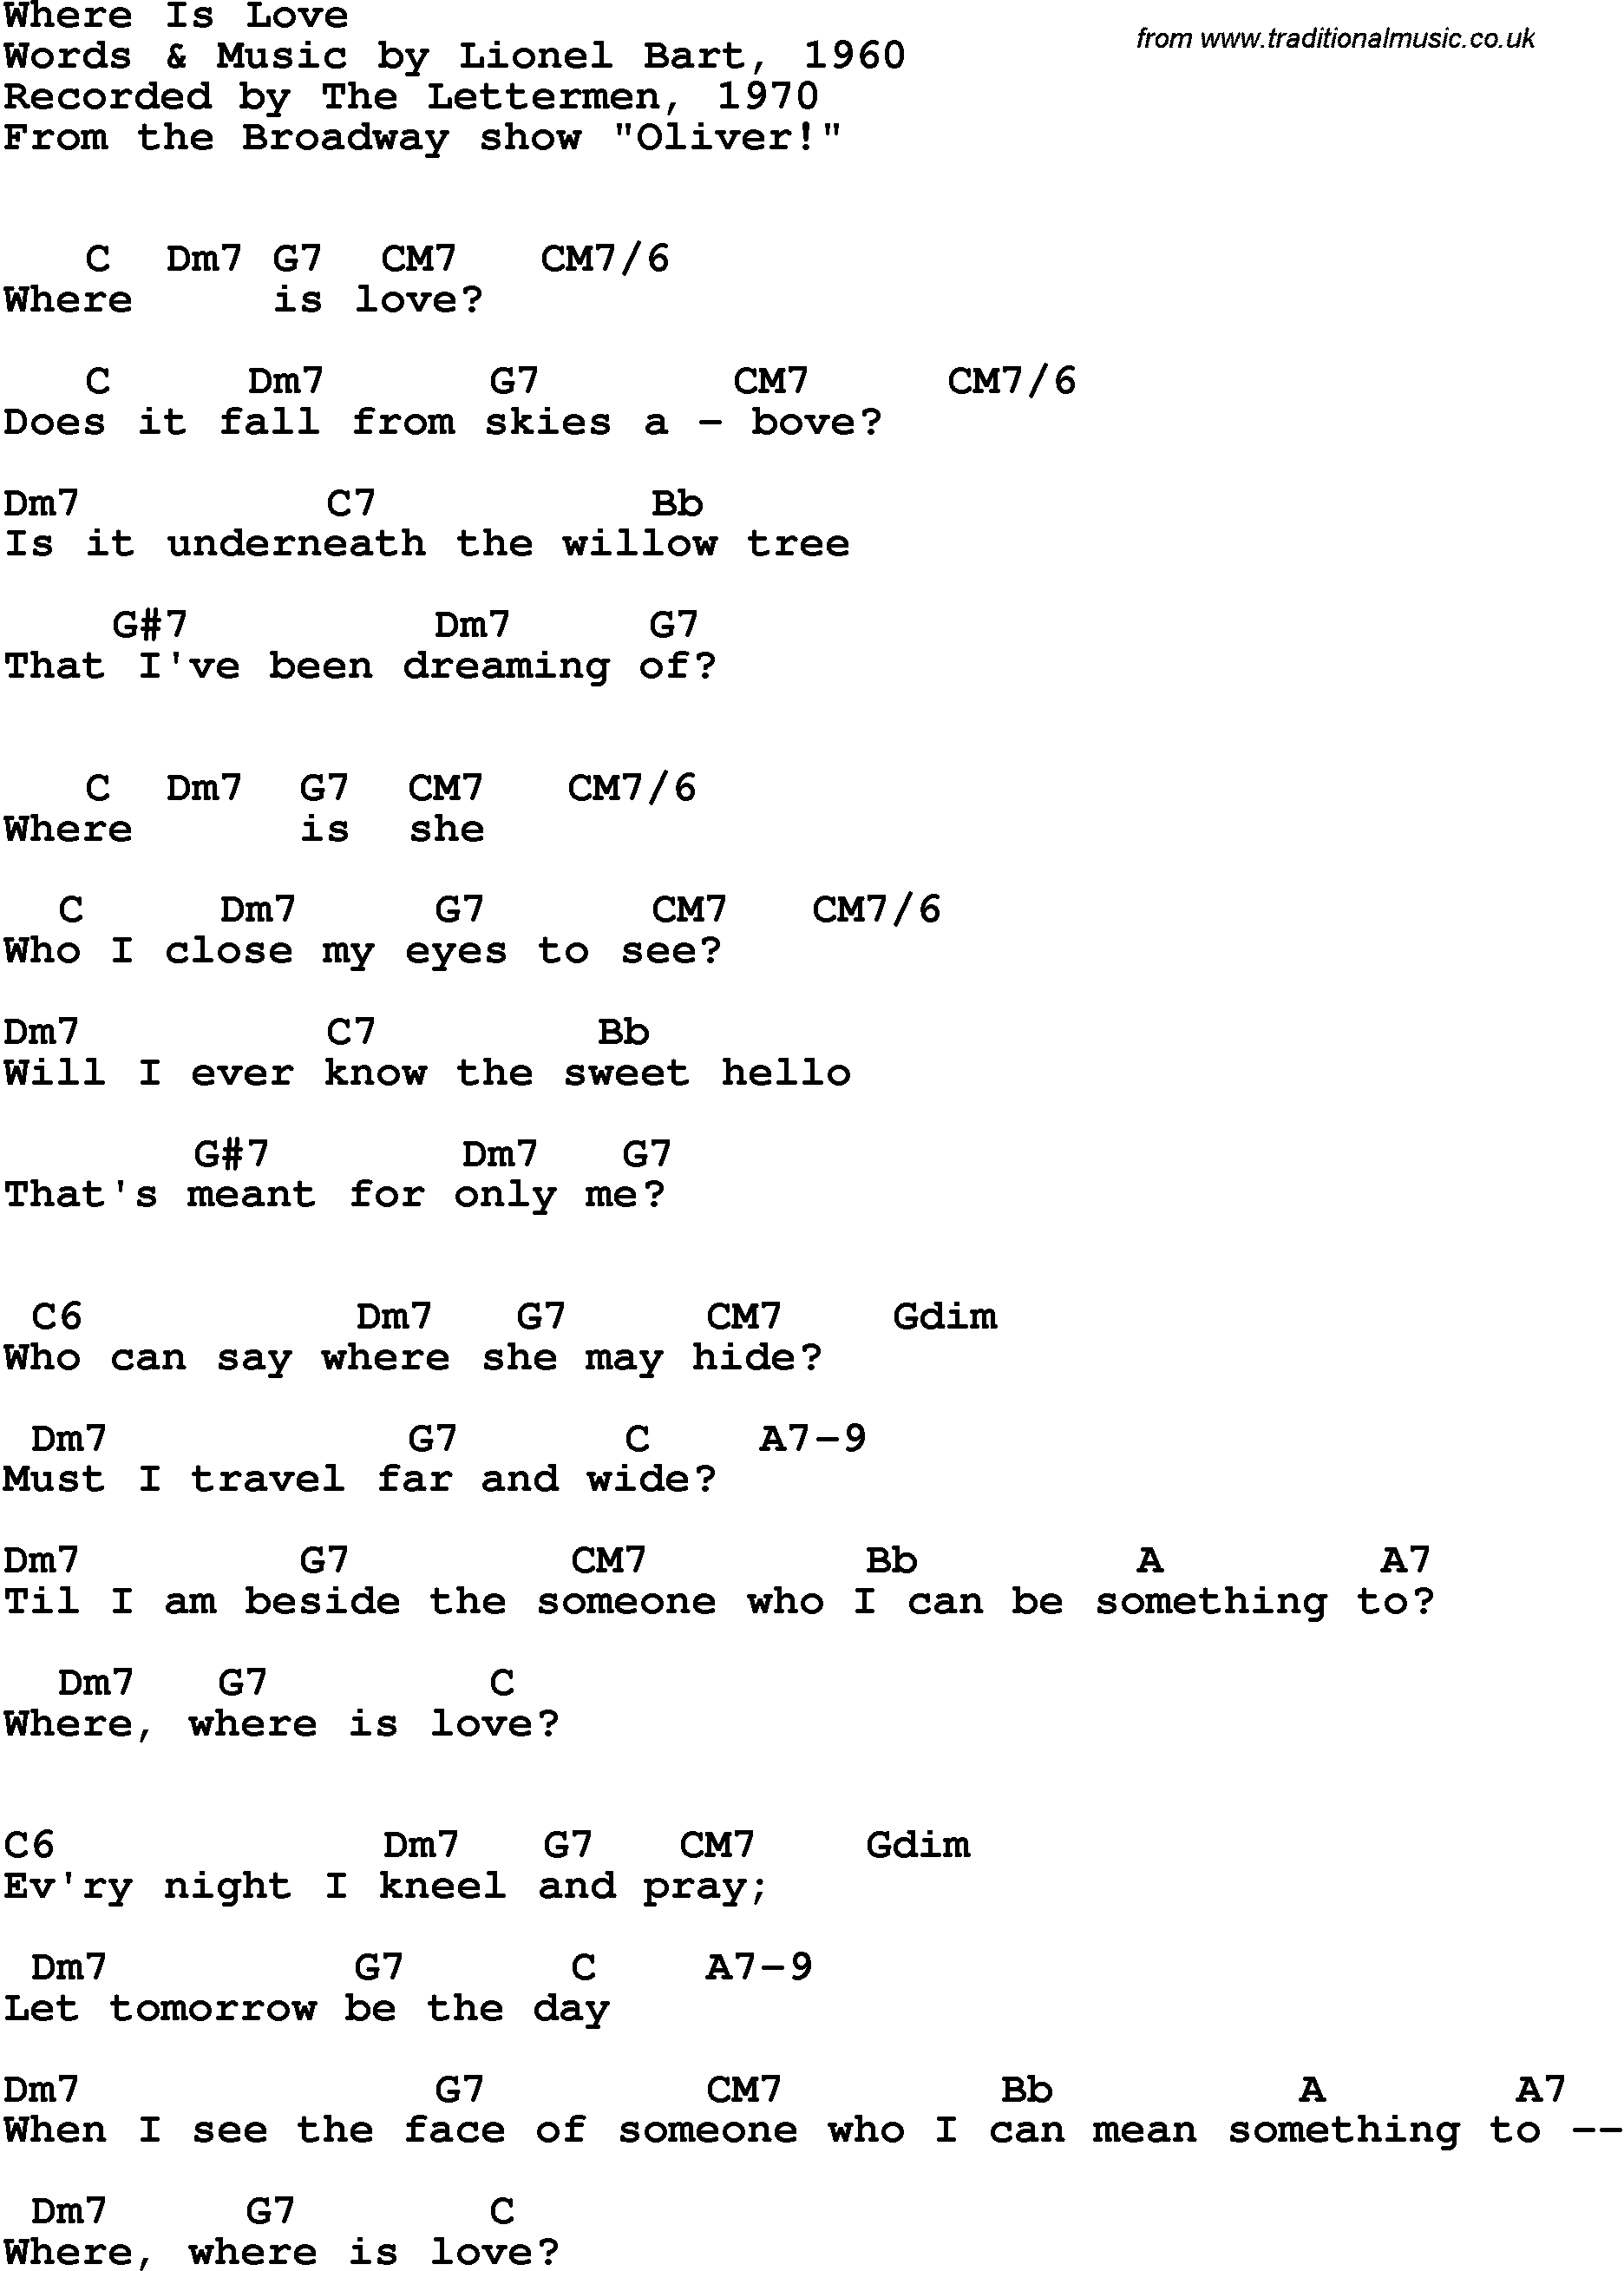 Song Lyrics with guitar chords for Where Is Love - The Lettermen, 1970